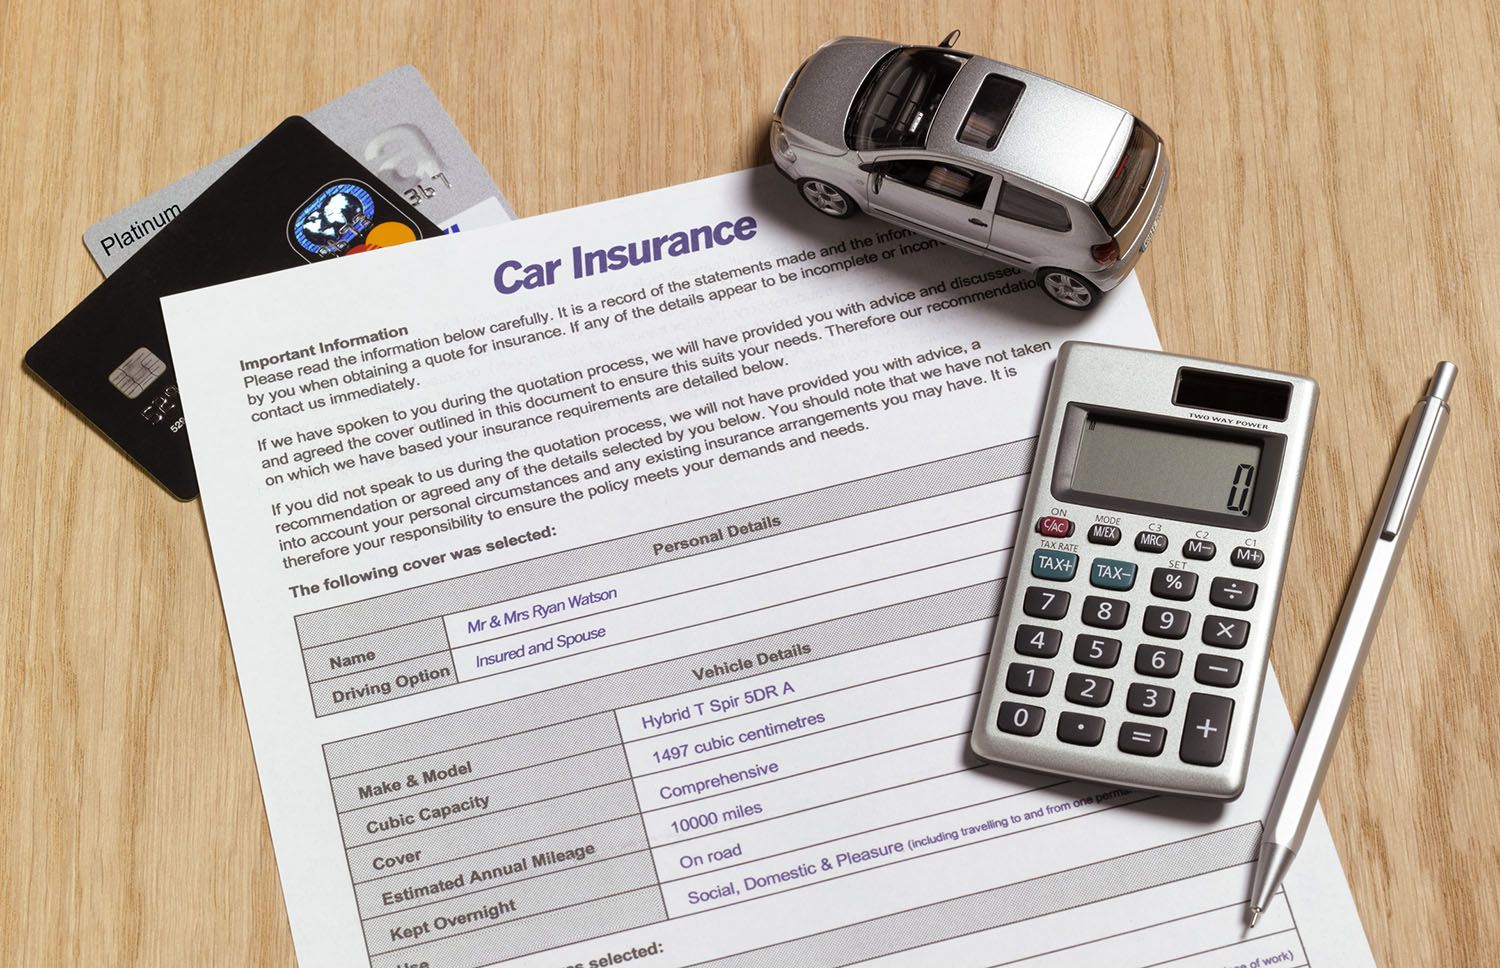 Fully comprehensive or partially comprehensive car insurance - what is best for me?